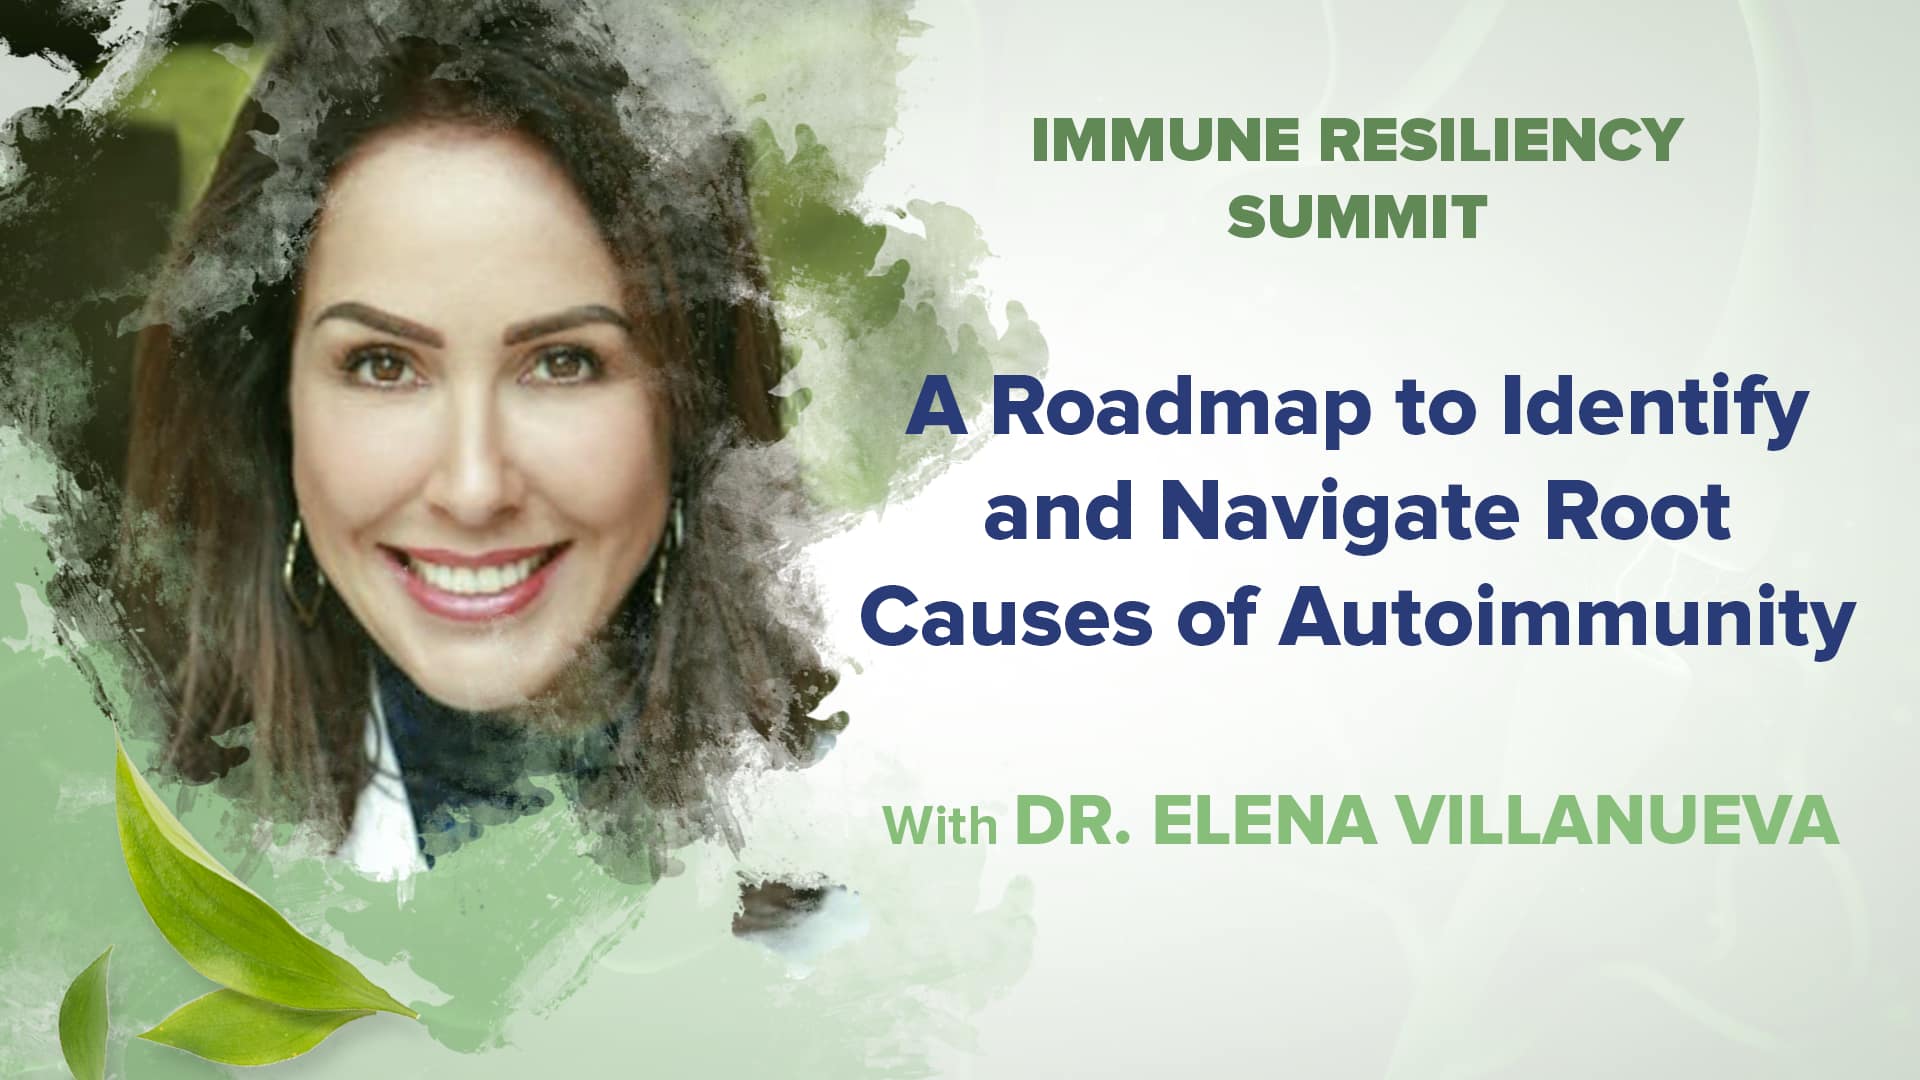 A Roadmap to Identify and Navigate Root Causes of Autoimmunity